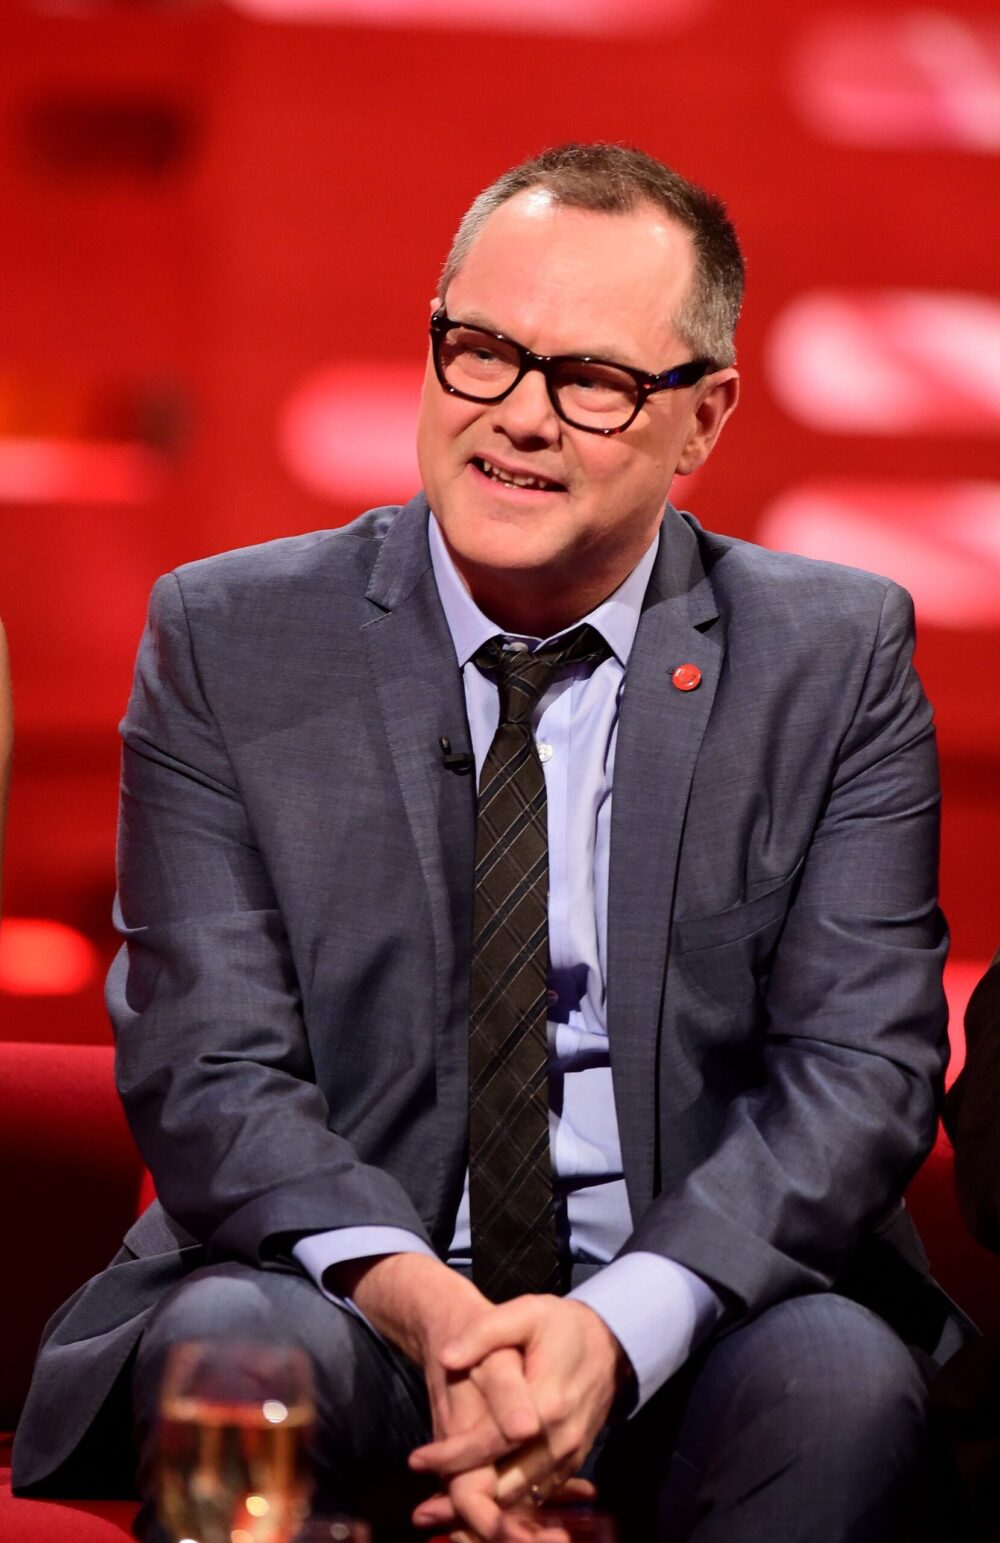 Jack Dee on The Graham Norton Show. Credit: PA